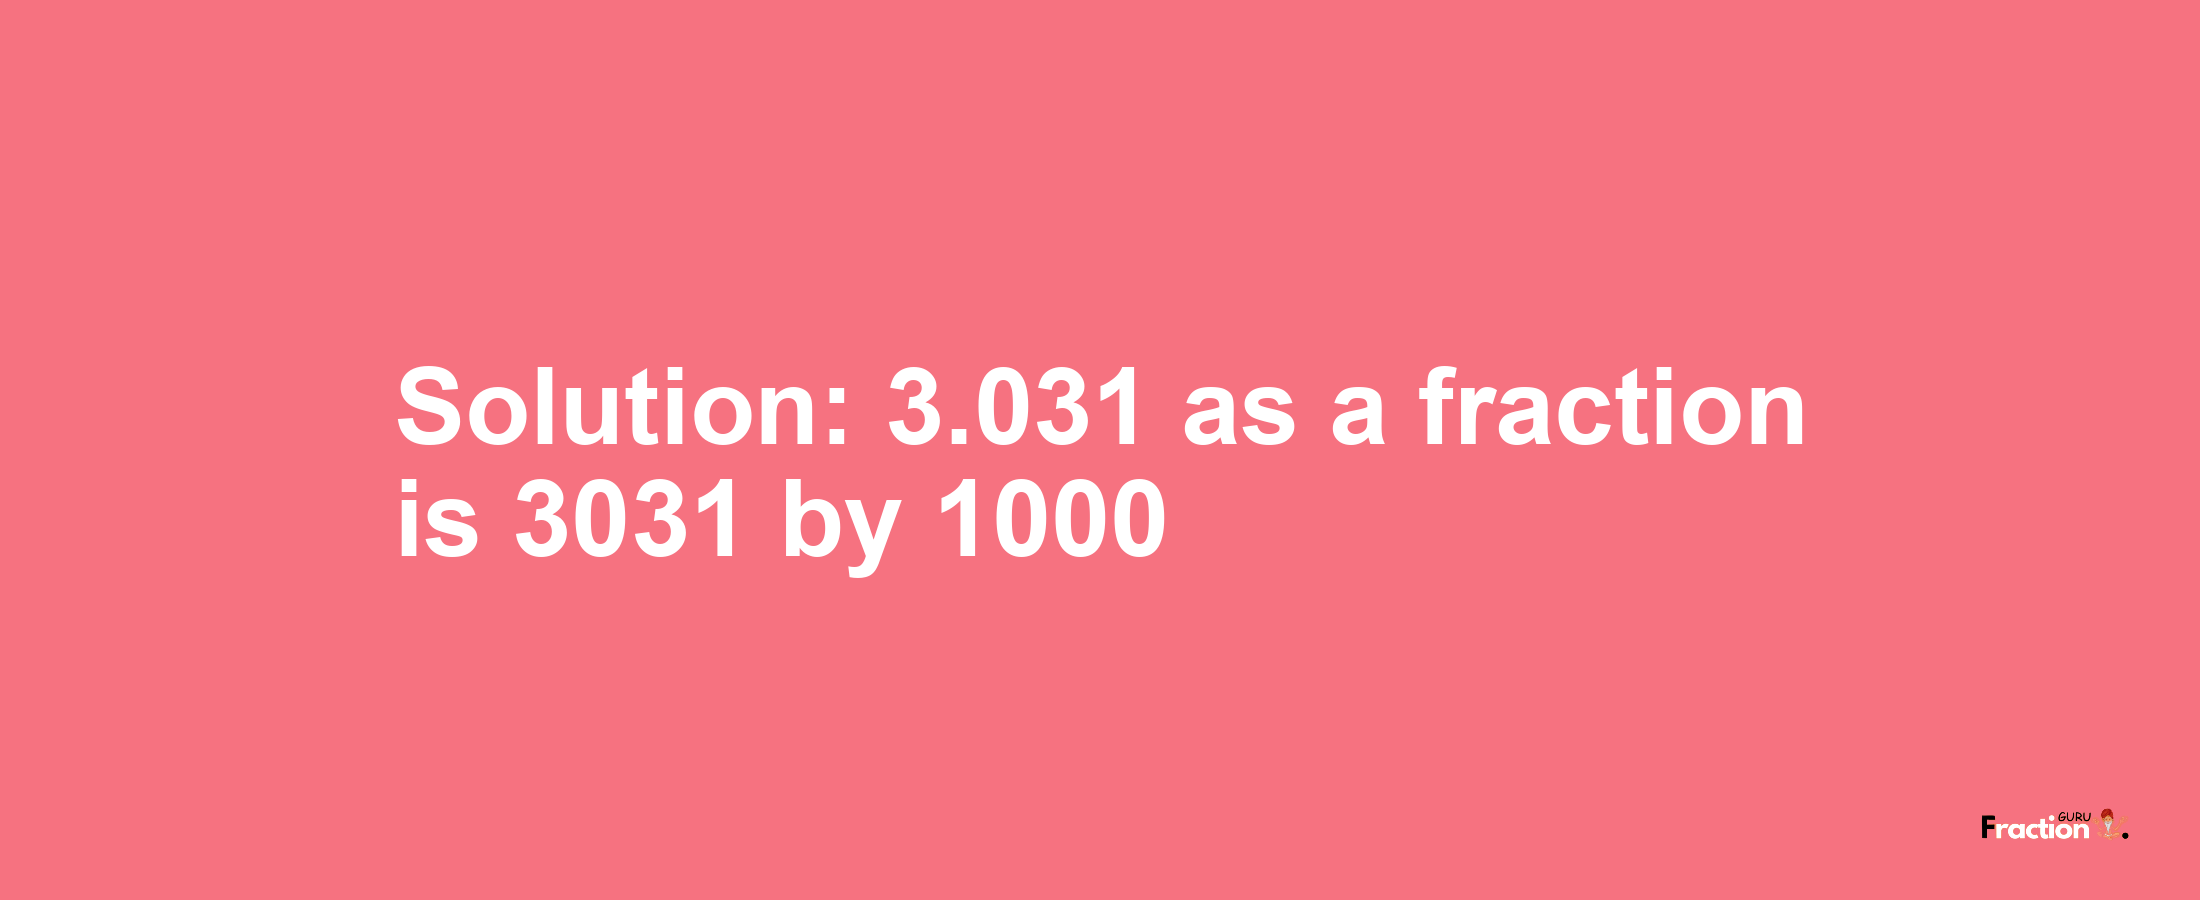 Solution:3.031 as a fraction is 3031/1000